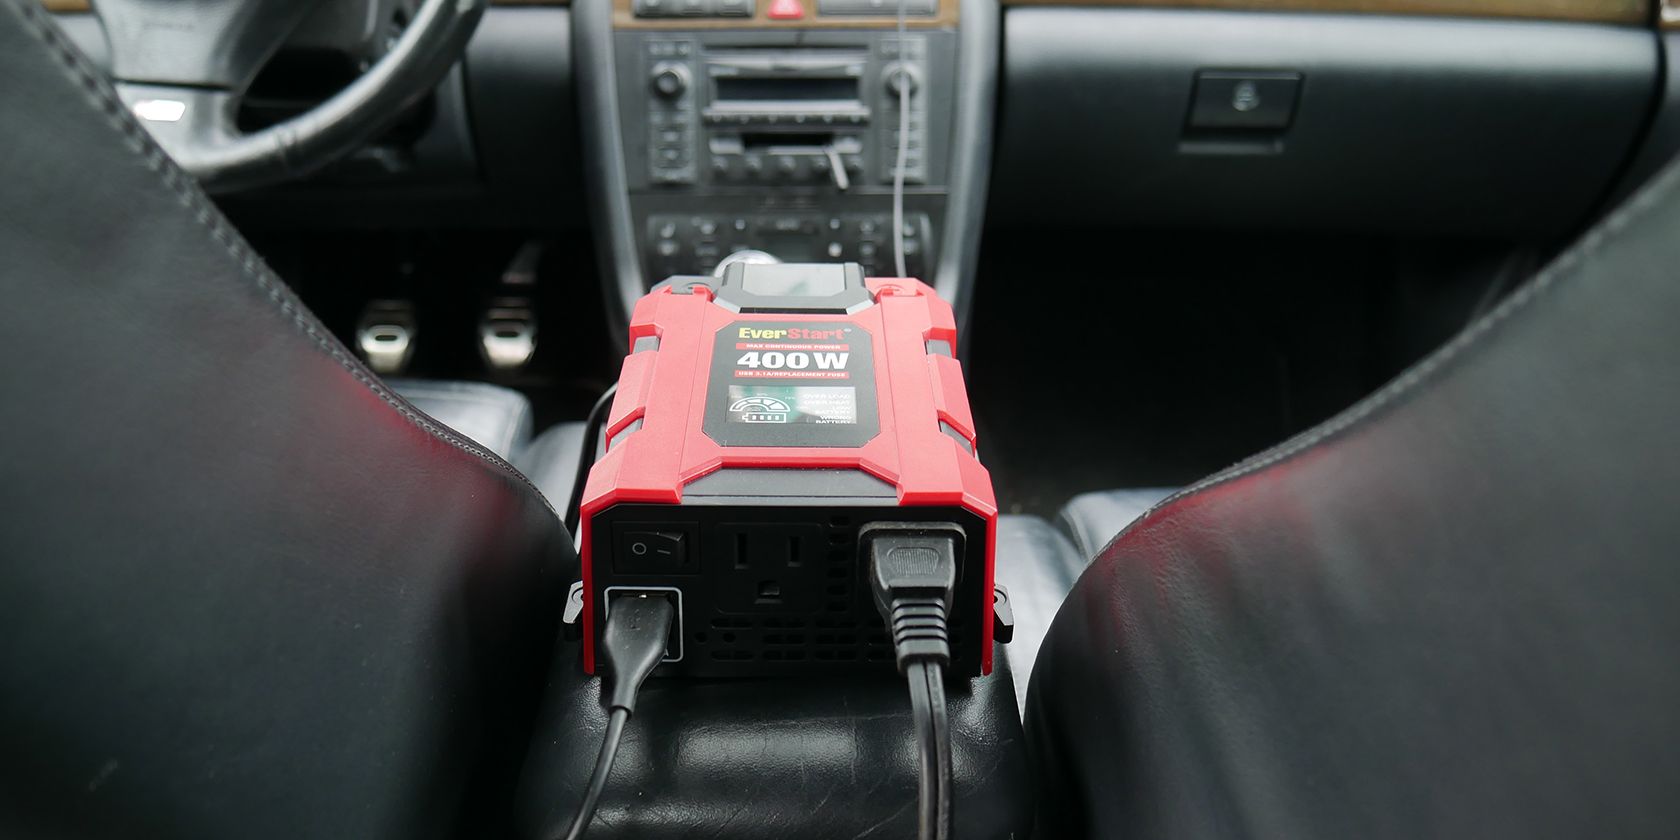 image of a 400w power inverter inside vehicle